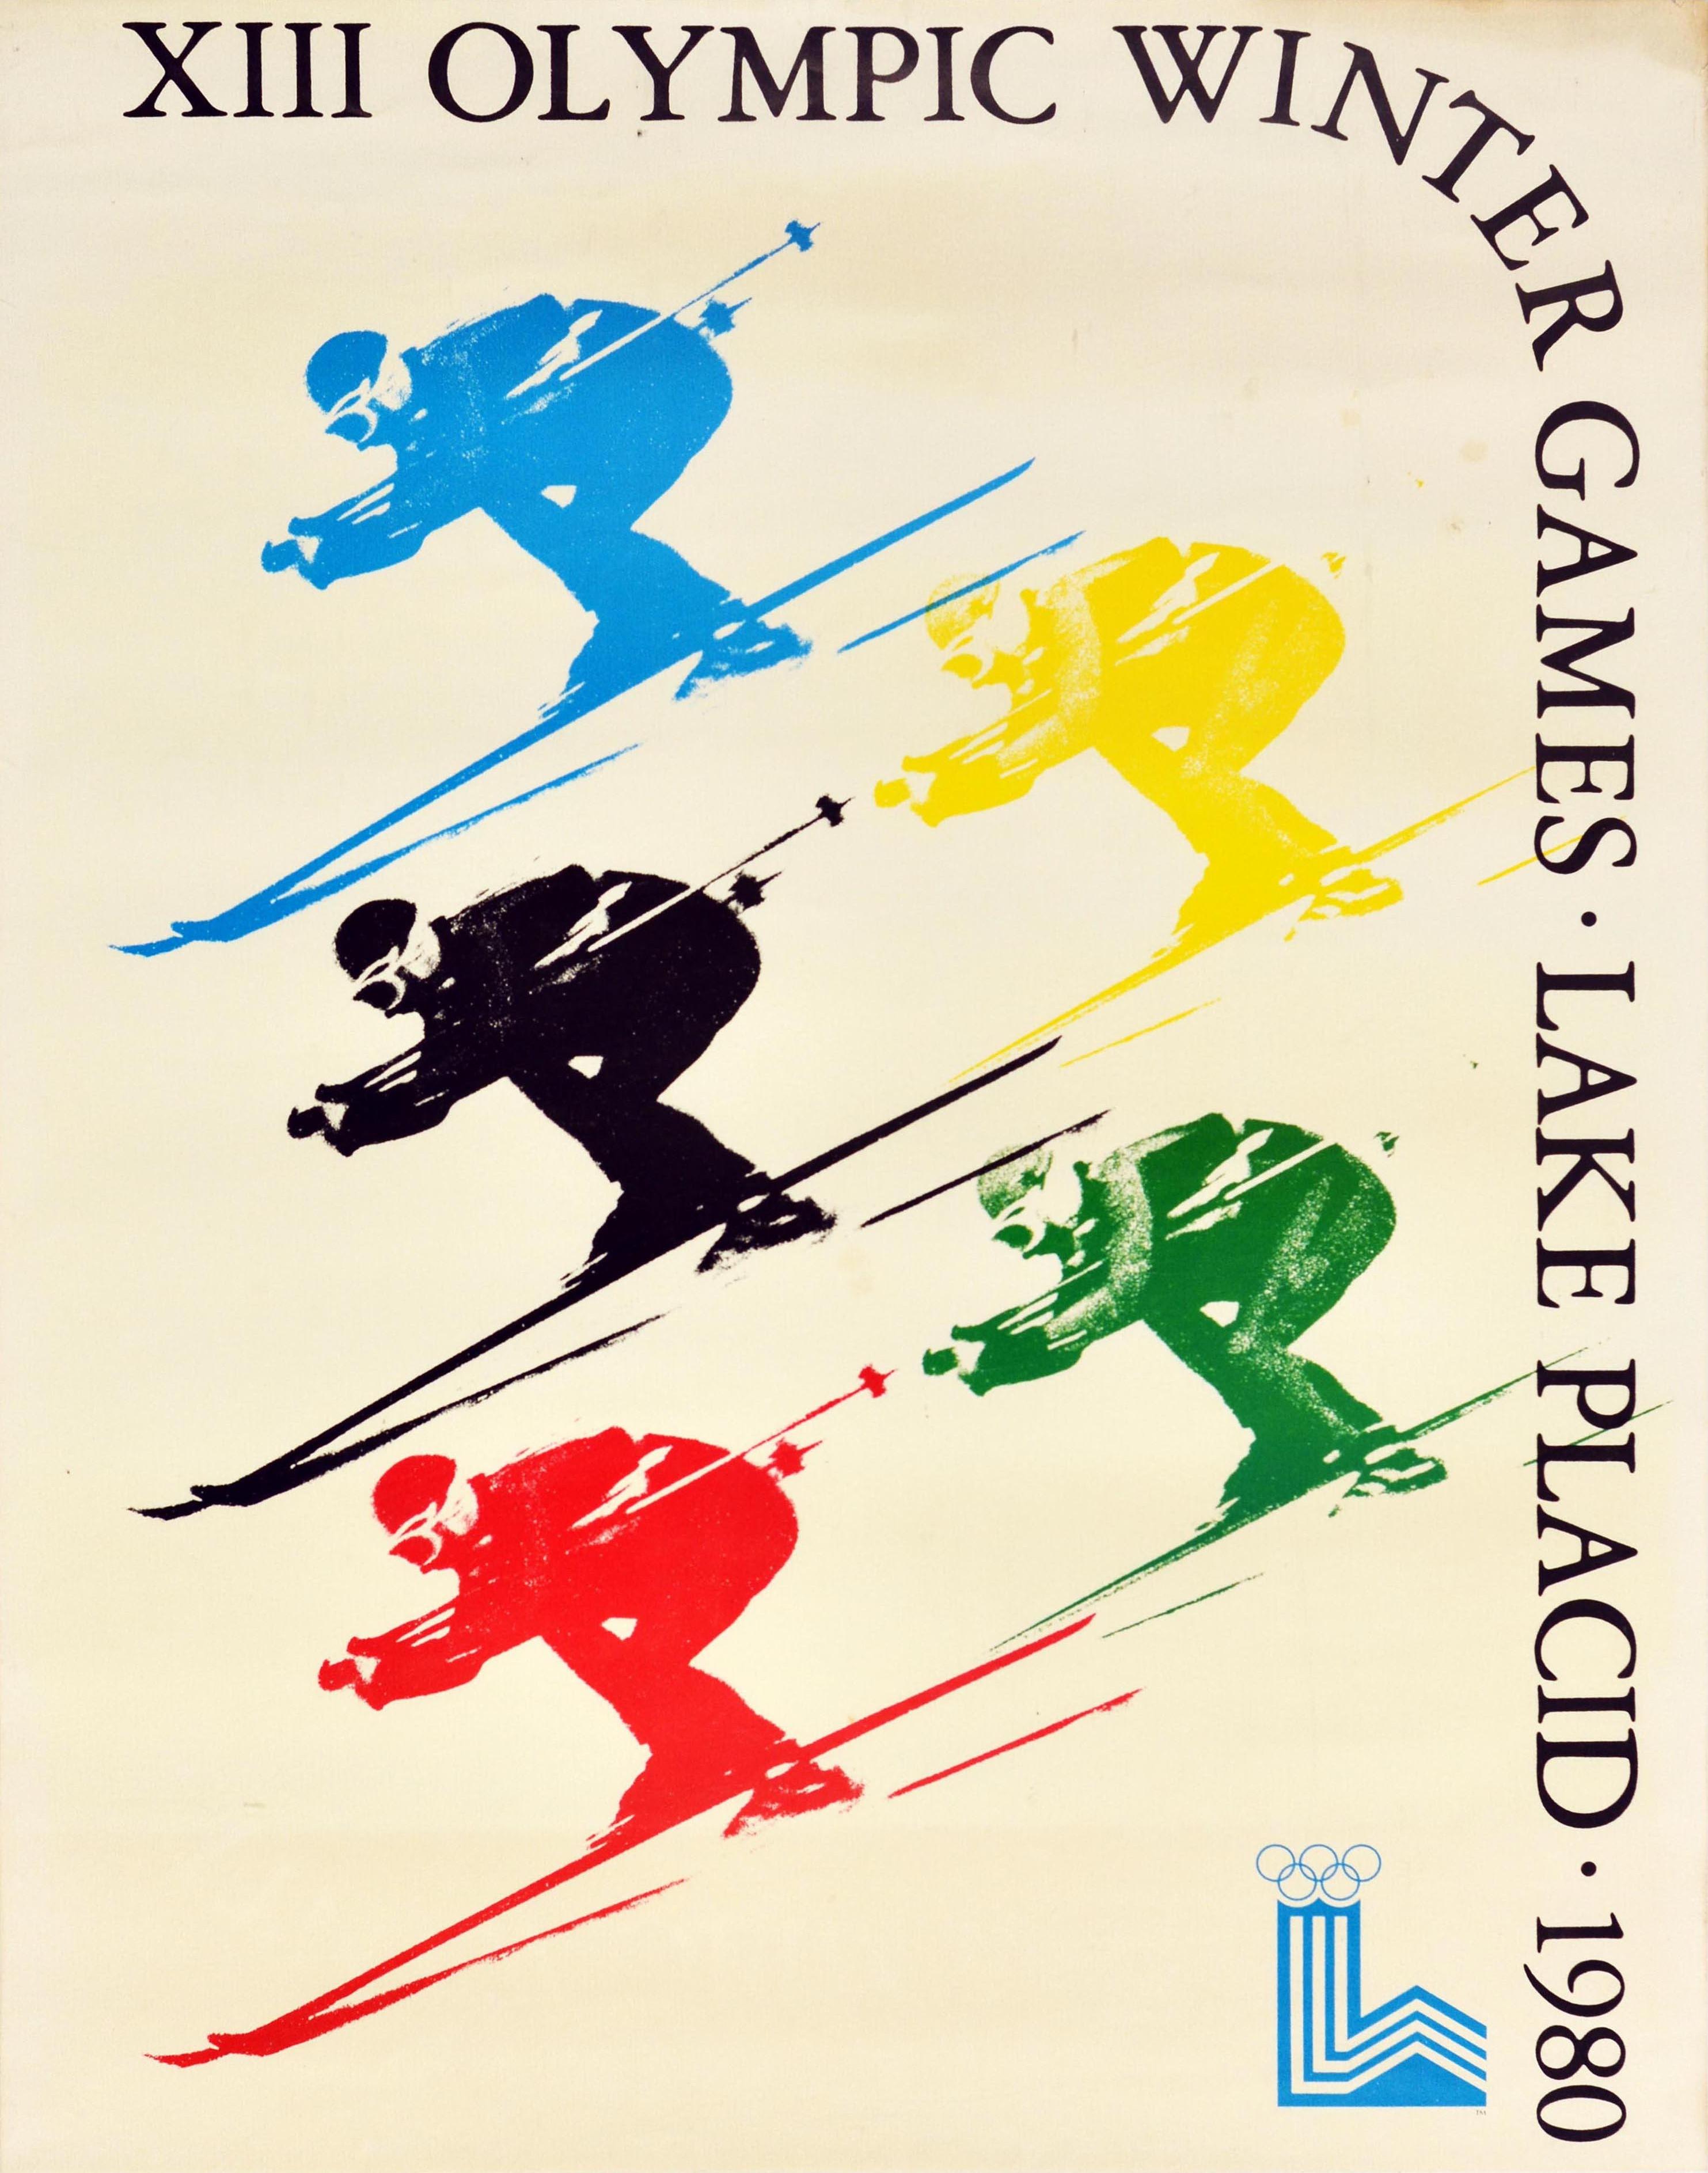 Original vintage sports advertising poster for the XIII Olympic Winter Games Lake Placid 1980 held in New York USA from 13-24 February featuring a dynamic illustration of skiers in colours of the Olympic rings - blue, yellow, black, green, and red -